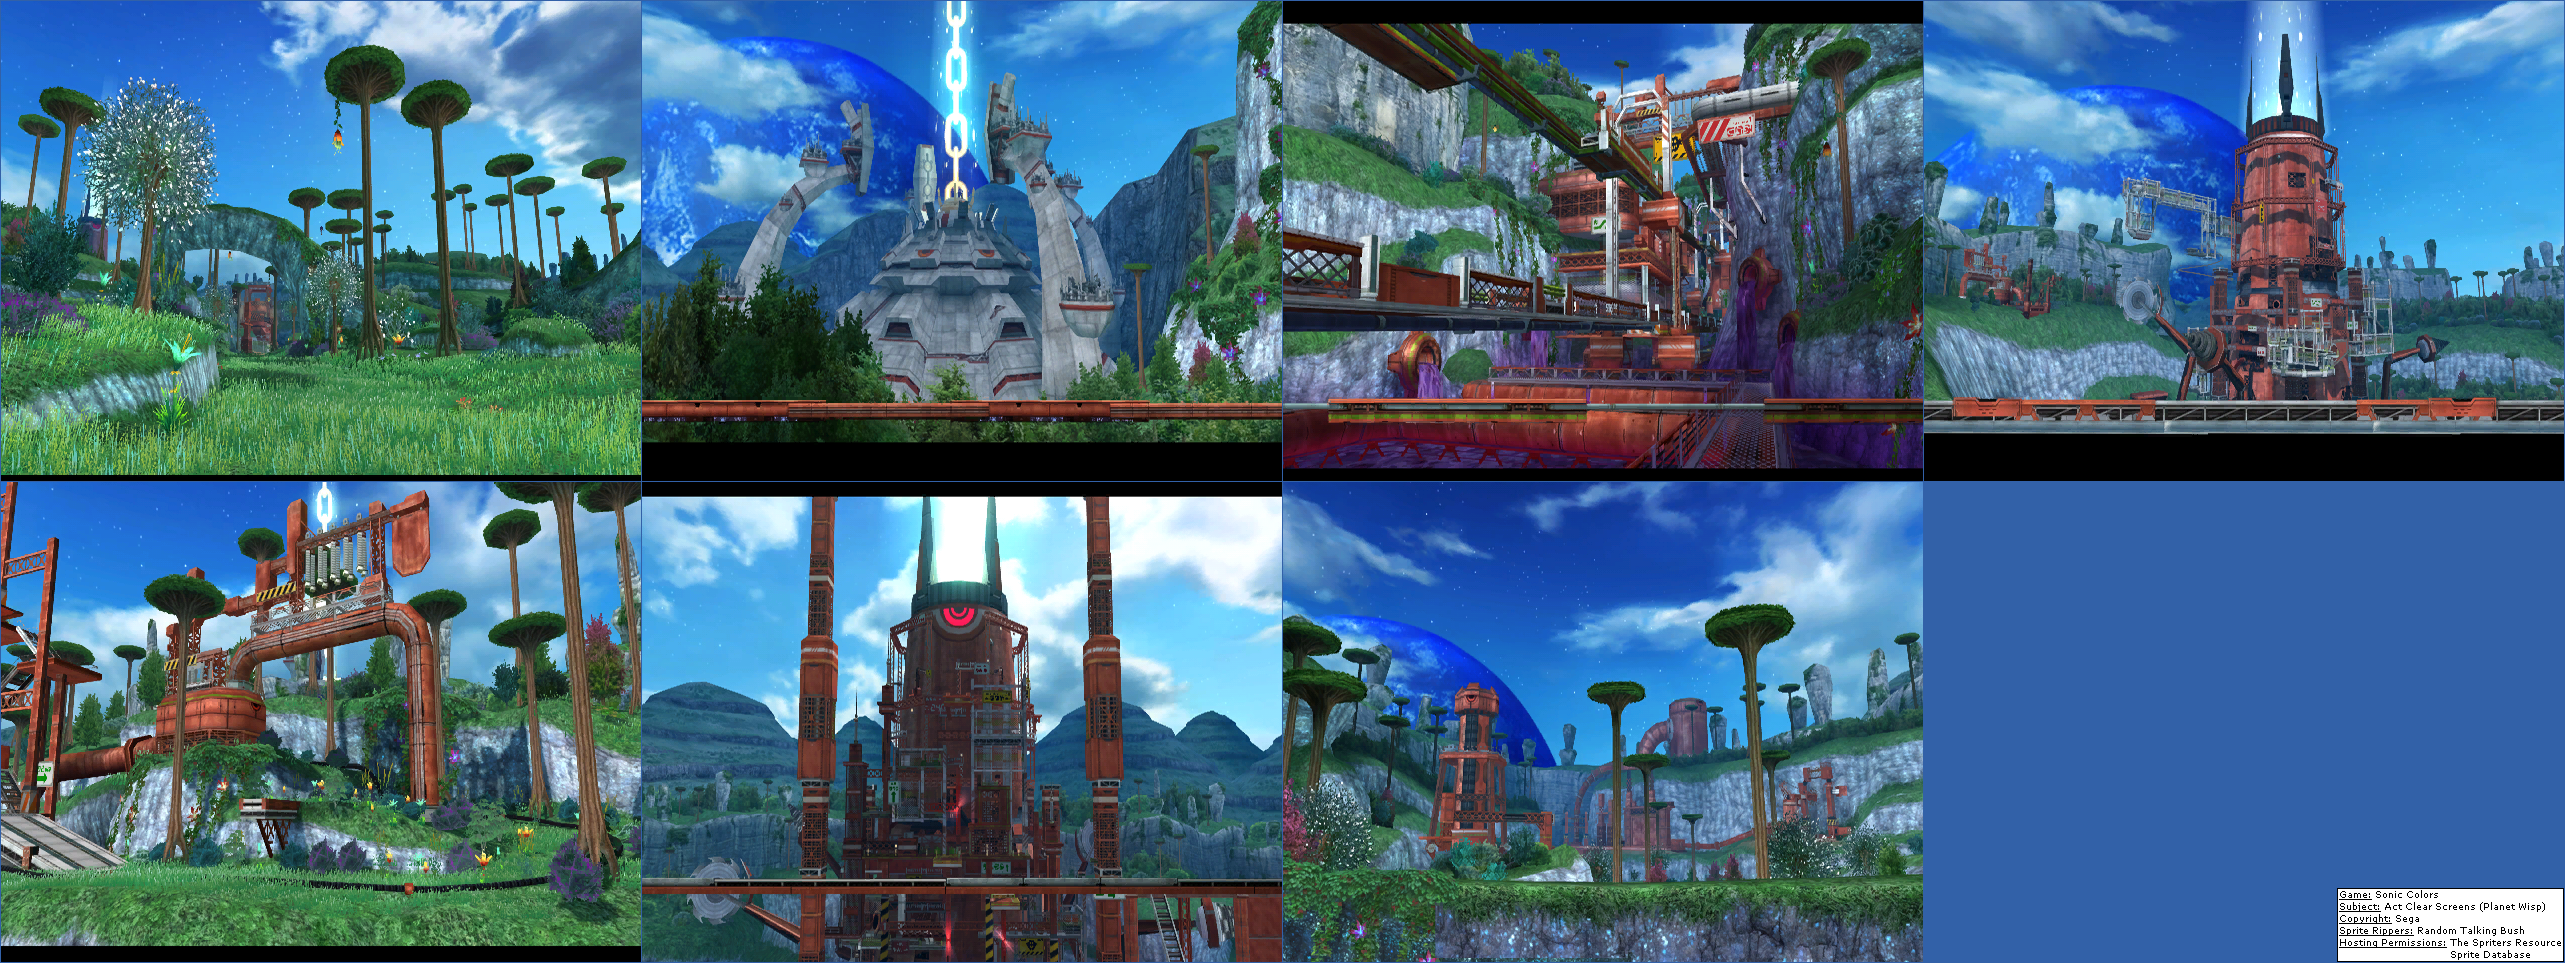 Sonic Colors - Act Clear Screens (Planet Wisp)